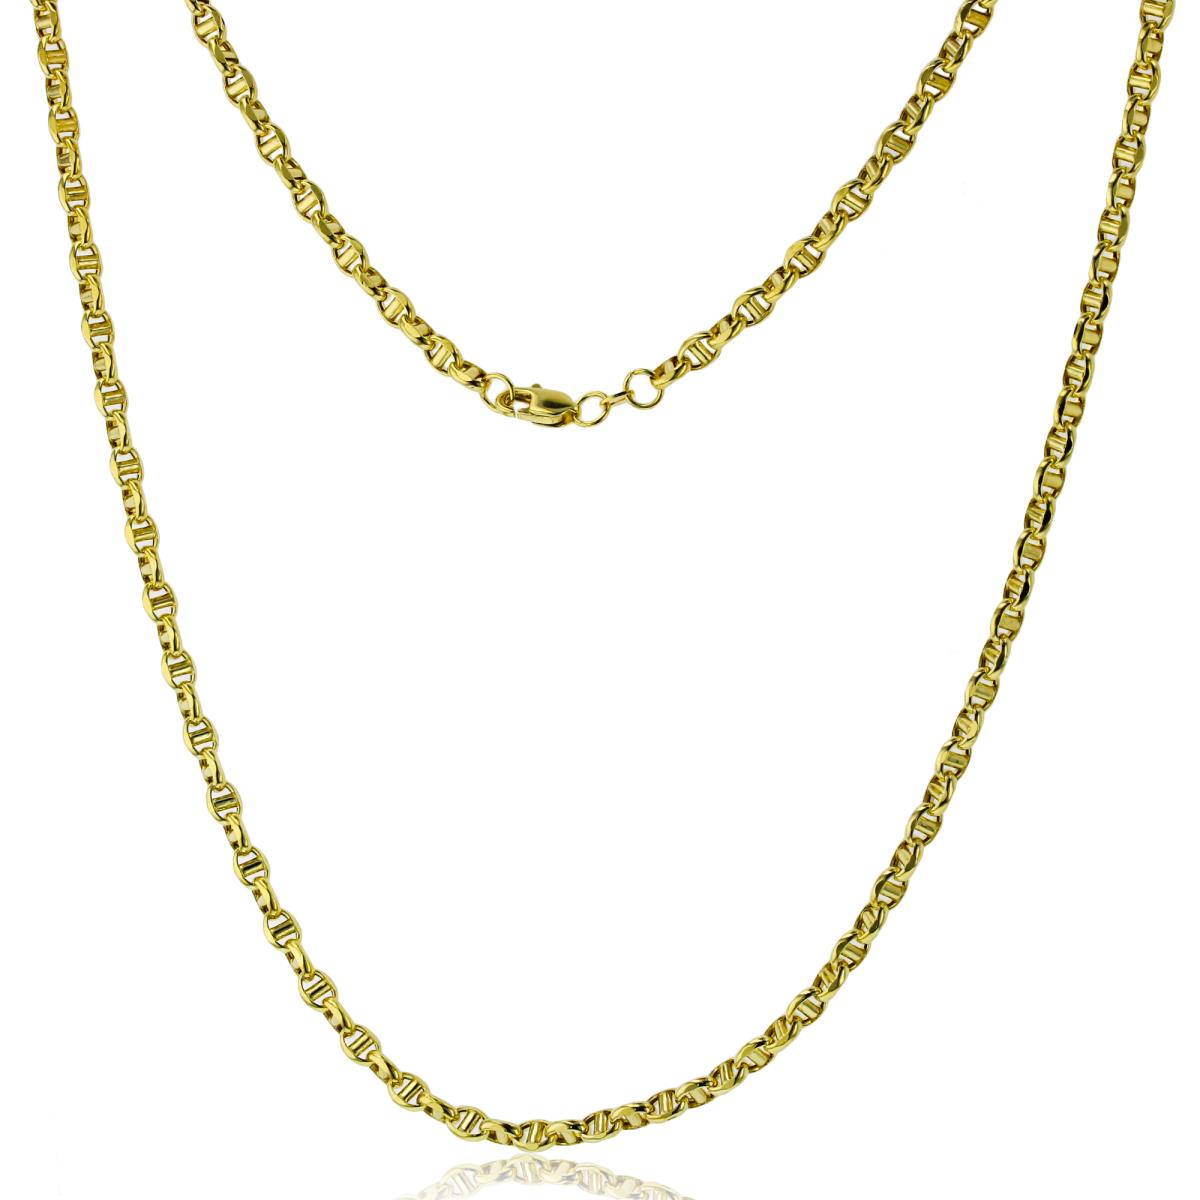 10K Yellow Gold Polished 4.15mm 22" Hollow Filk Chain